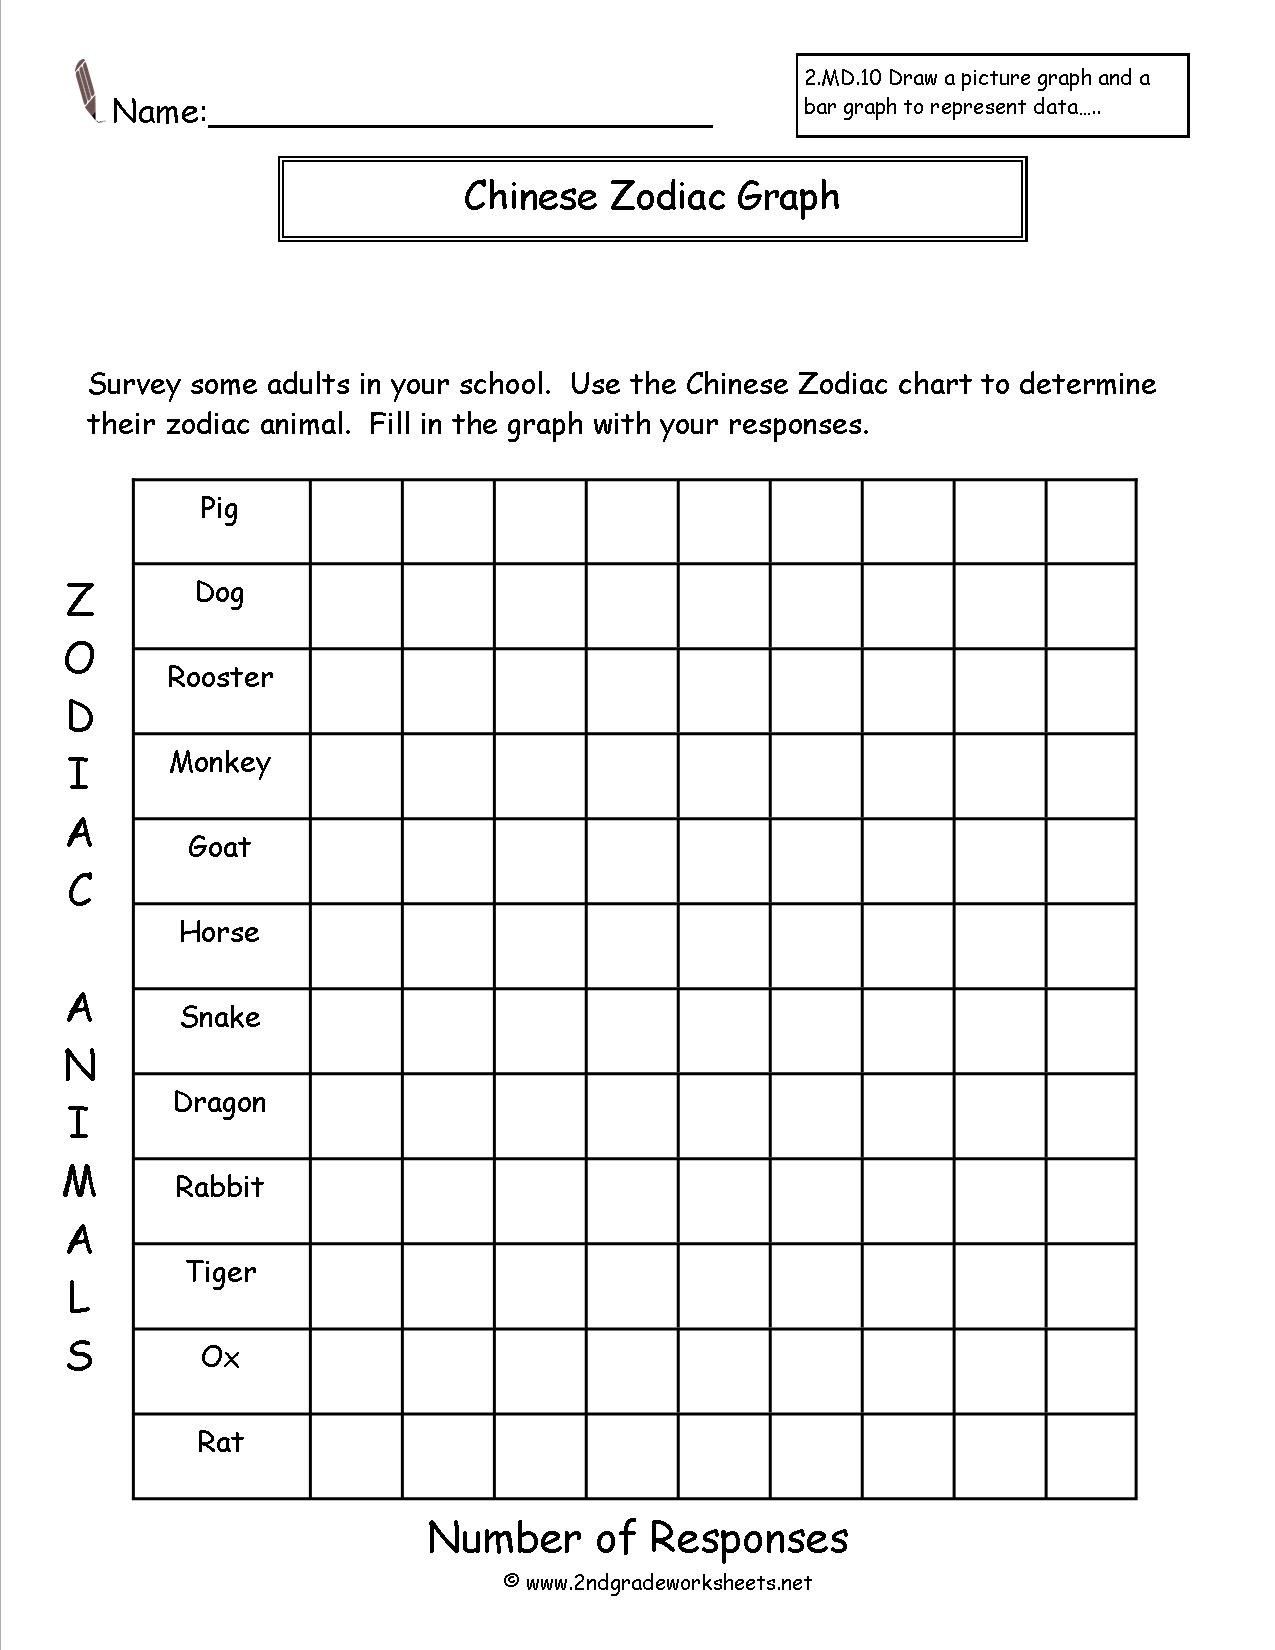 Free Reading And Creating Bar Graph Worksheets As Well As Graphing Worksheets 1St Grade